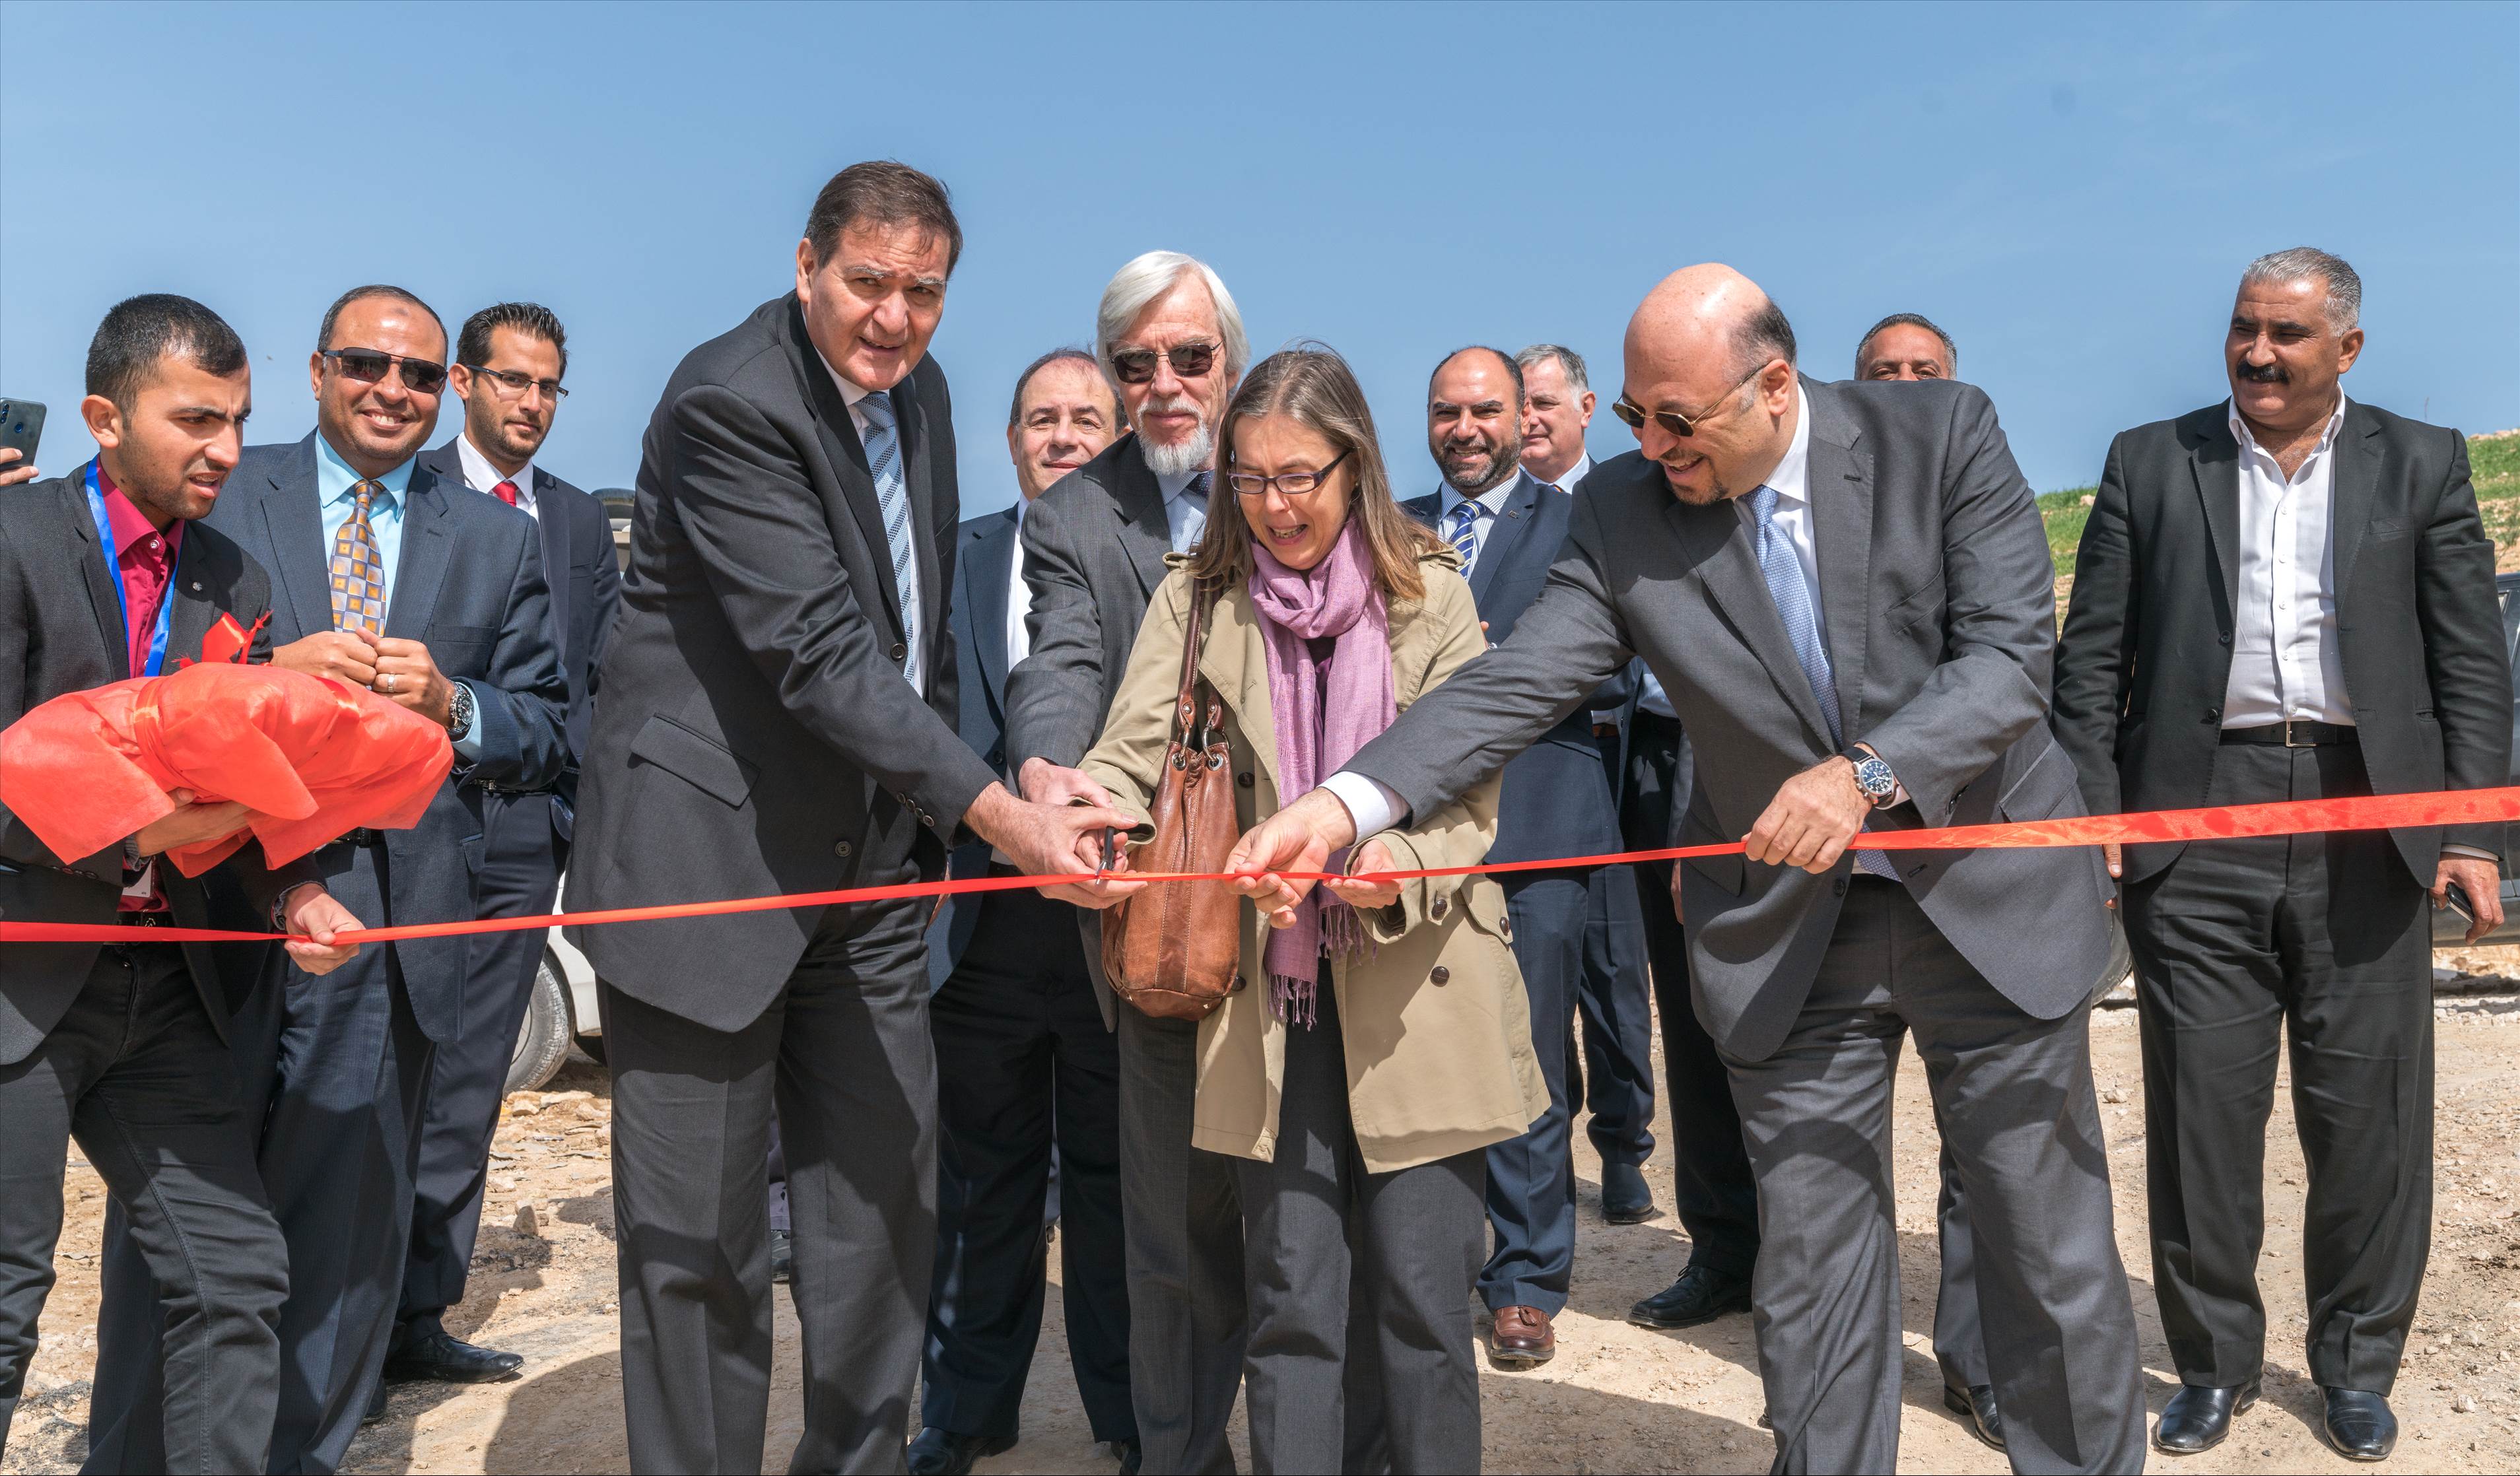 Dignitaries formally inaugurate SESAME's solar energy plant. Cutting the ribbon are (left to right): SESAME Director Khaled Toukan, President of the SESAME Council, Rolf Heuer and Sirpa Tulia, representing the Head of the EU Delegation to Jordan.